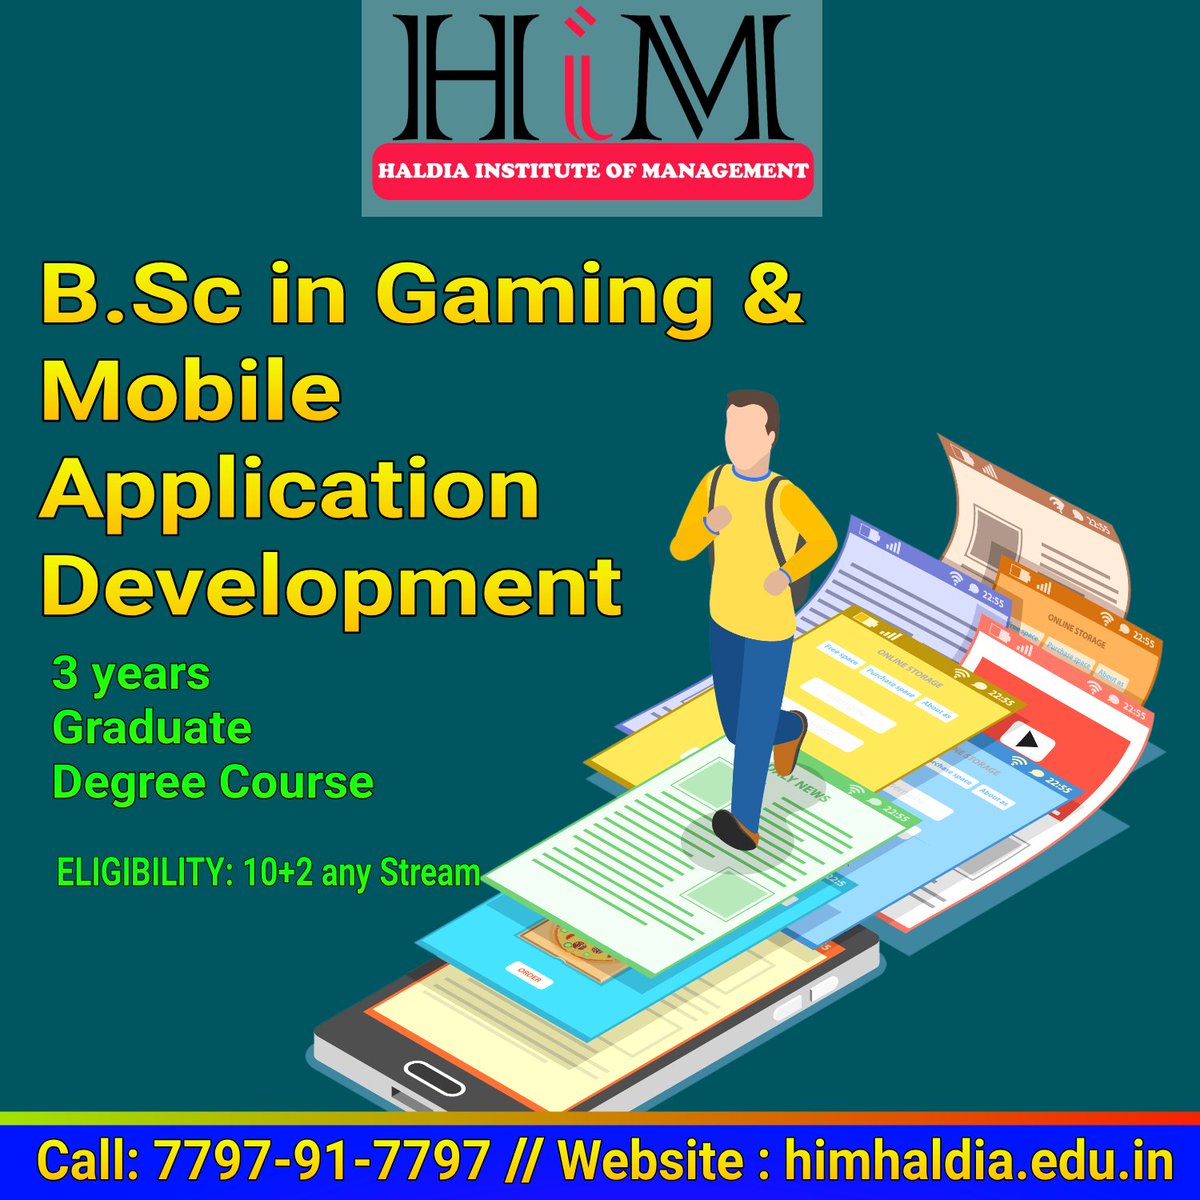 B.Sc in Gaming and Mobile Application Development
Admission open 2020-21
Call us to know more: 7797-91-7797
#HaldiaInstituteofManagementis 
#bestmanagementcollege
See post by Haldia Institute of Management on Google: posts.gle/JN7wb